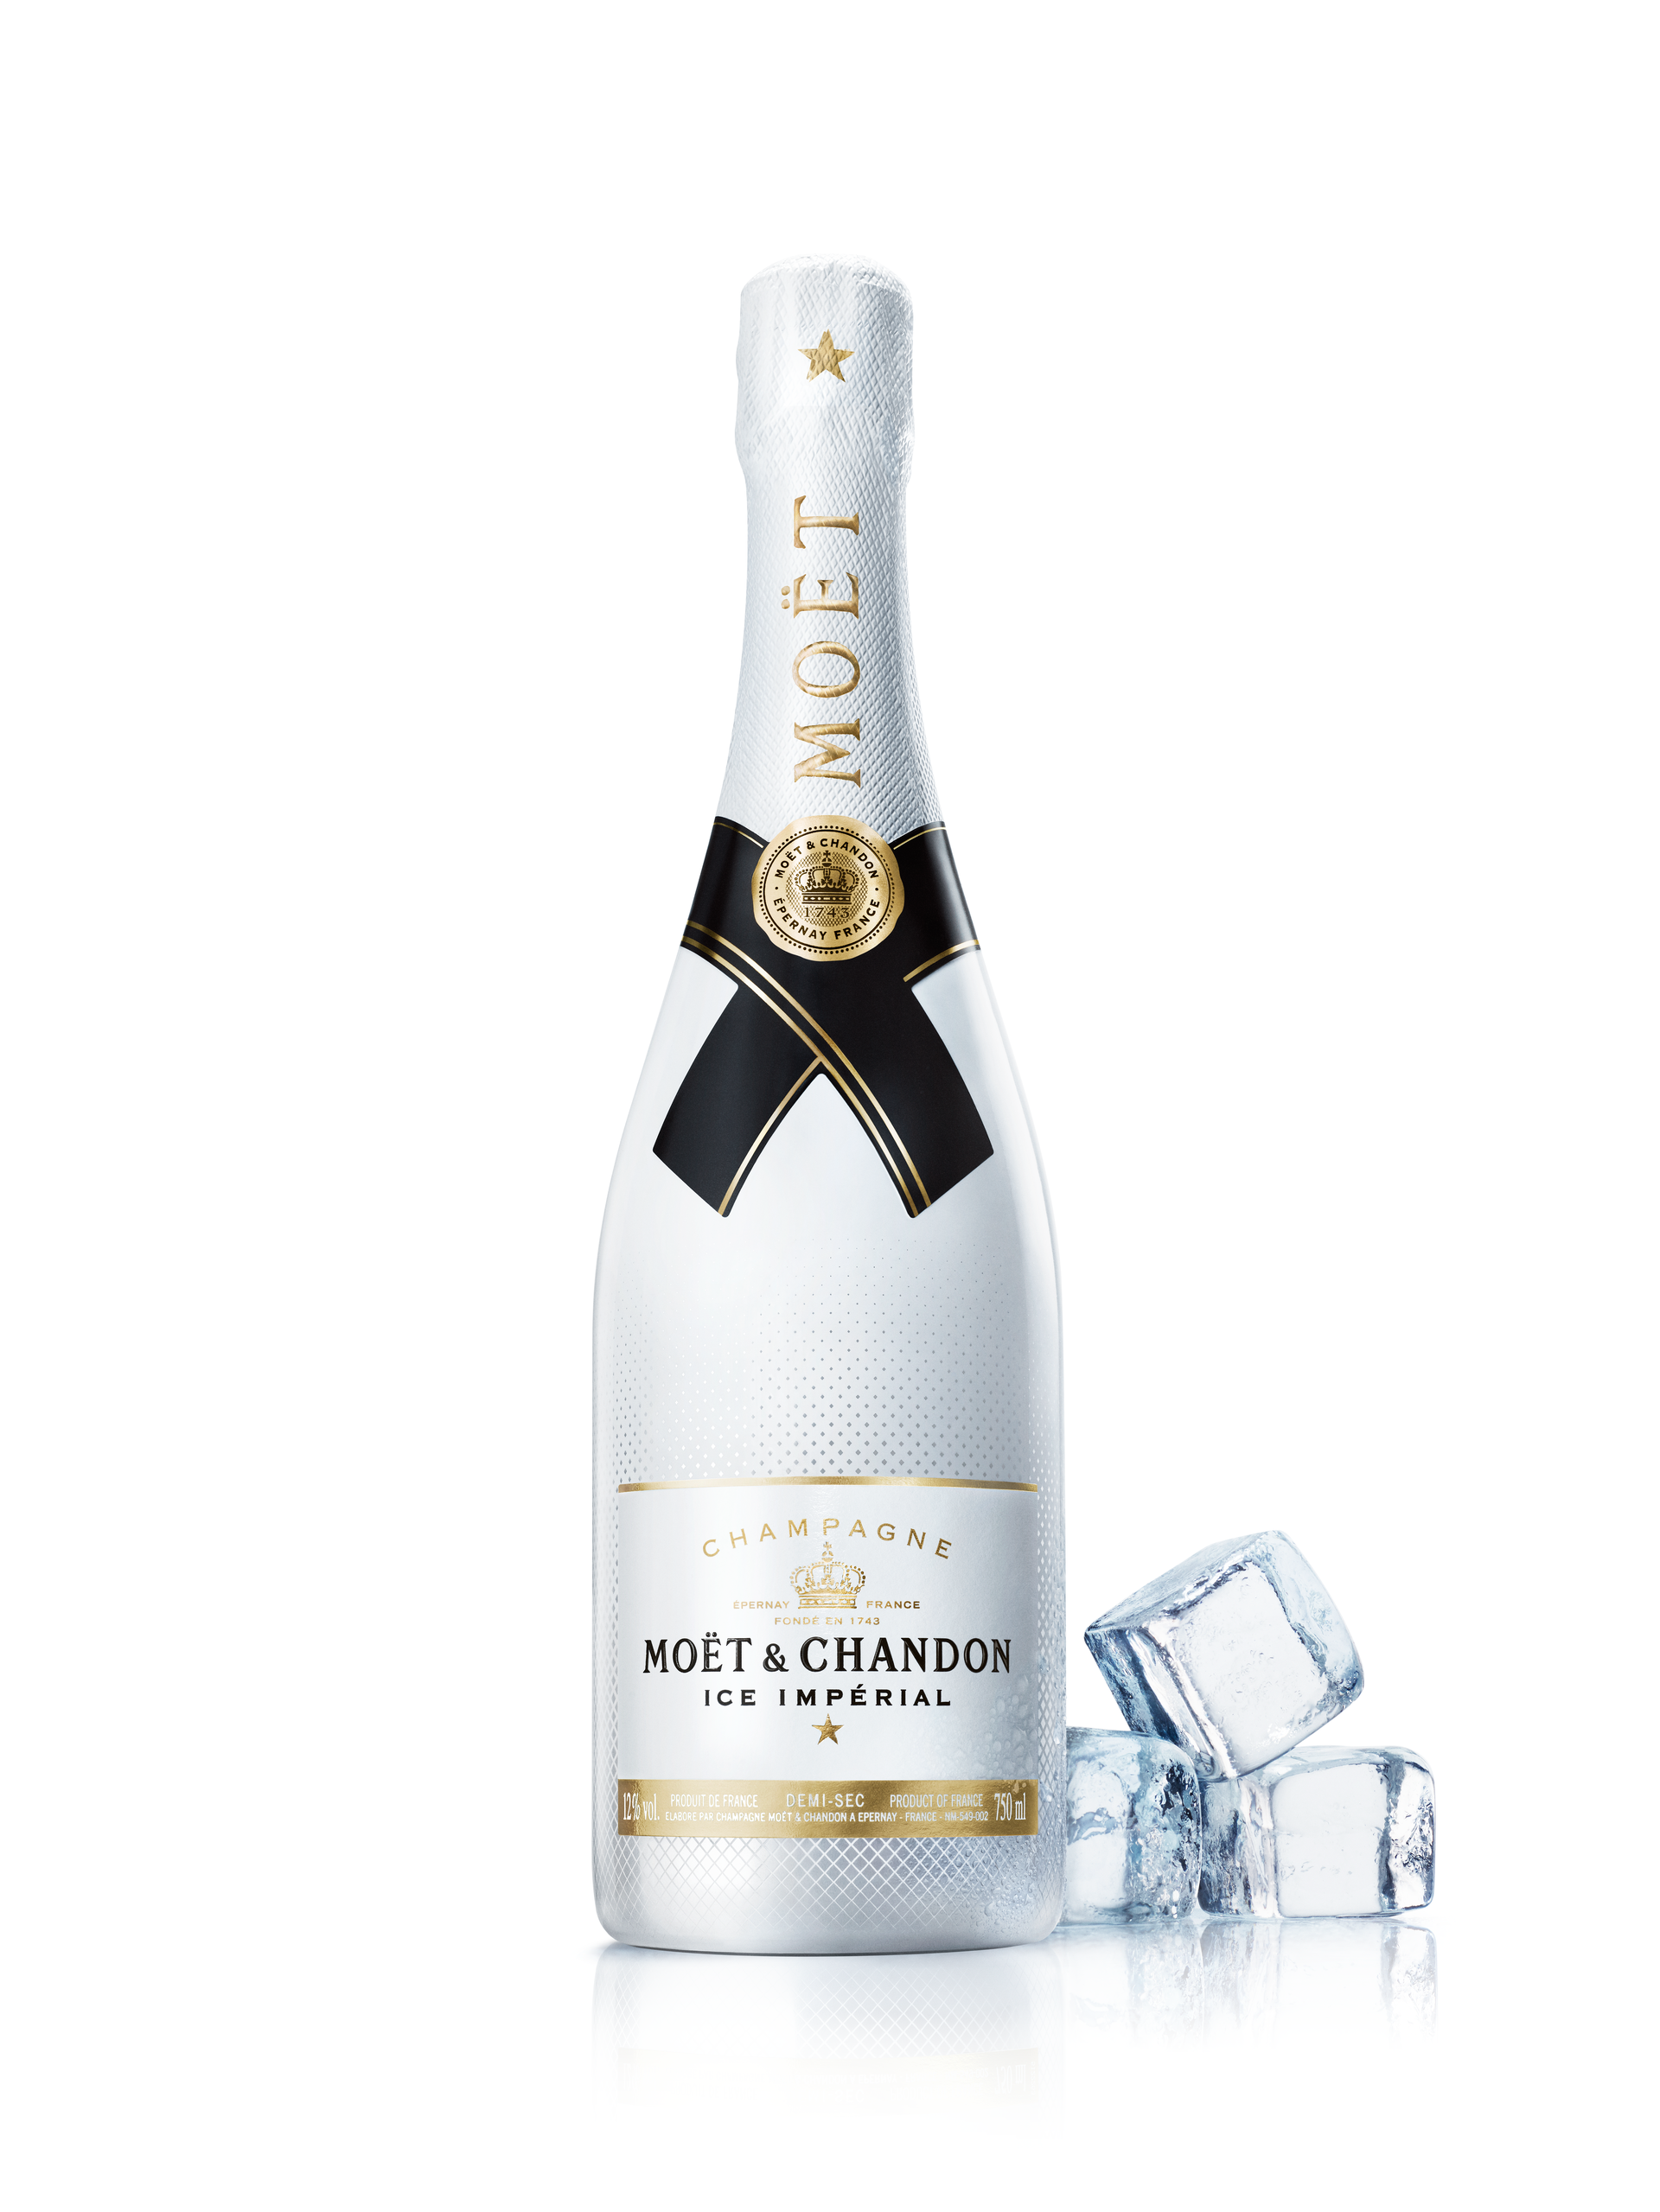 Moet & Chandon ICE Imperial